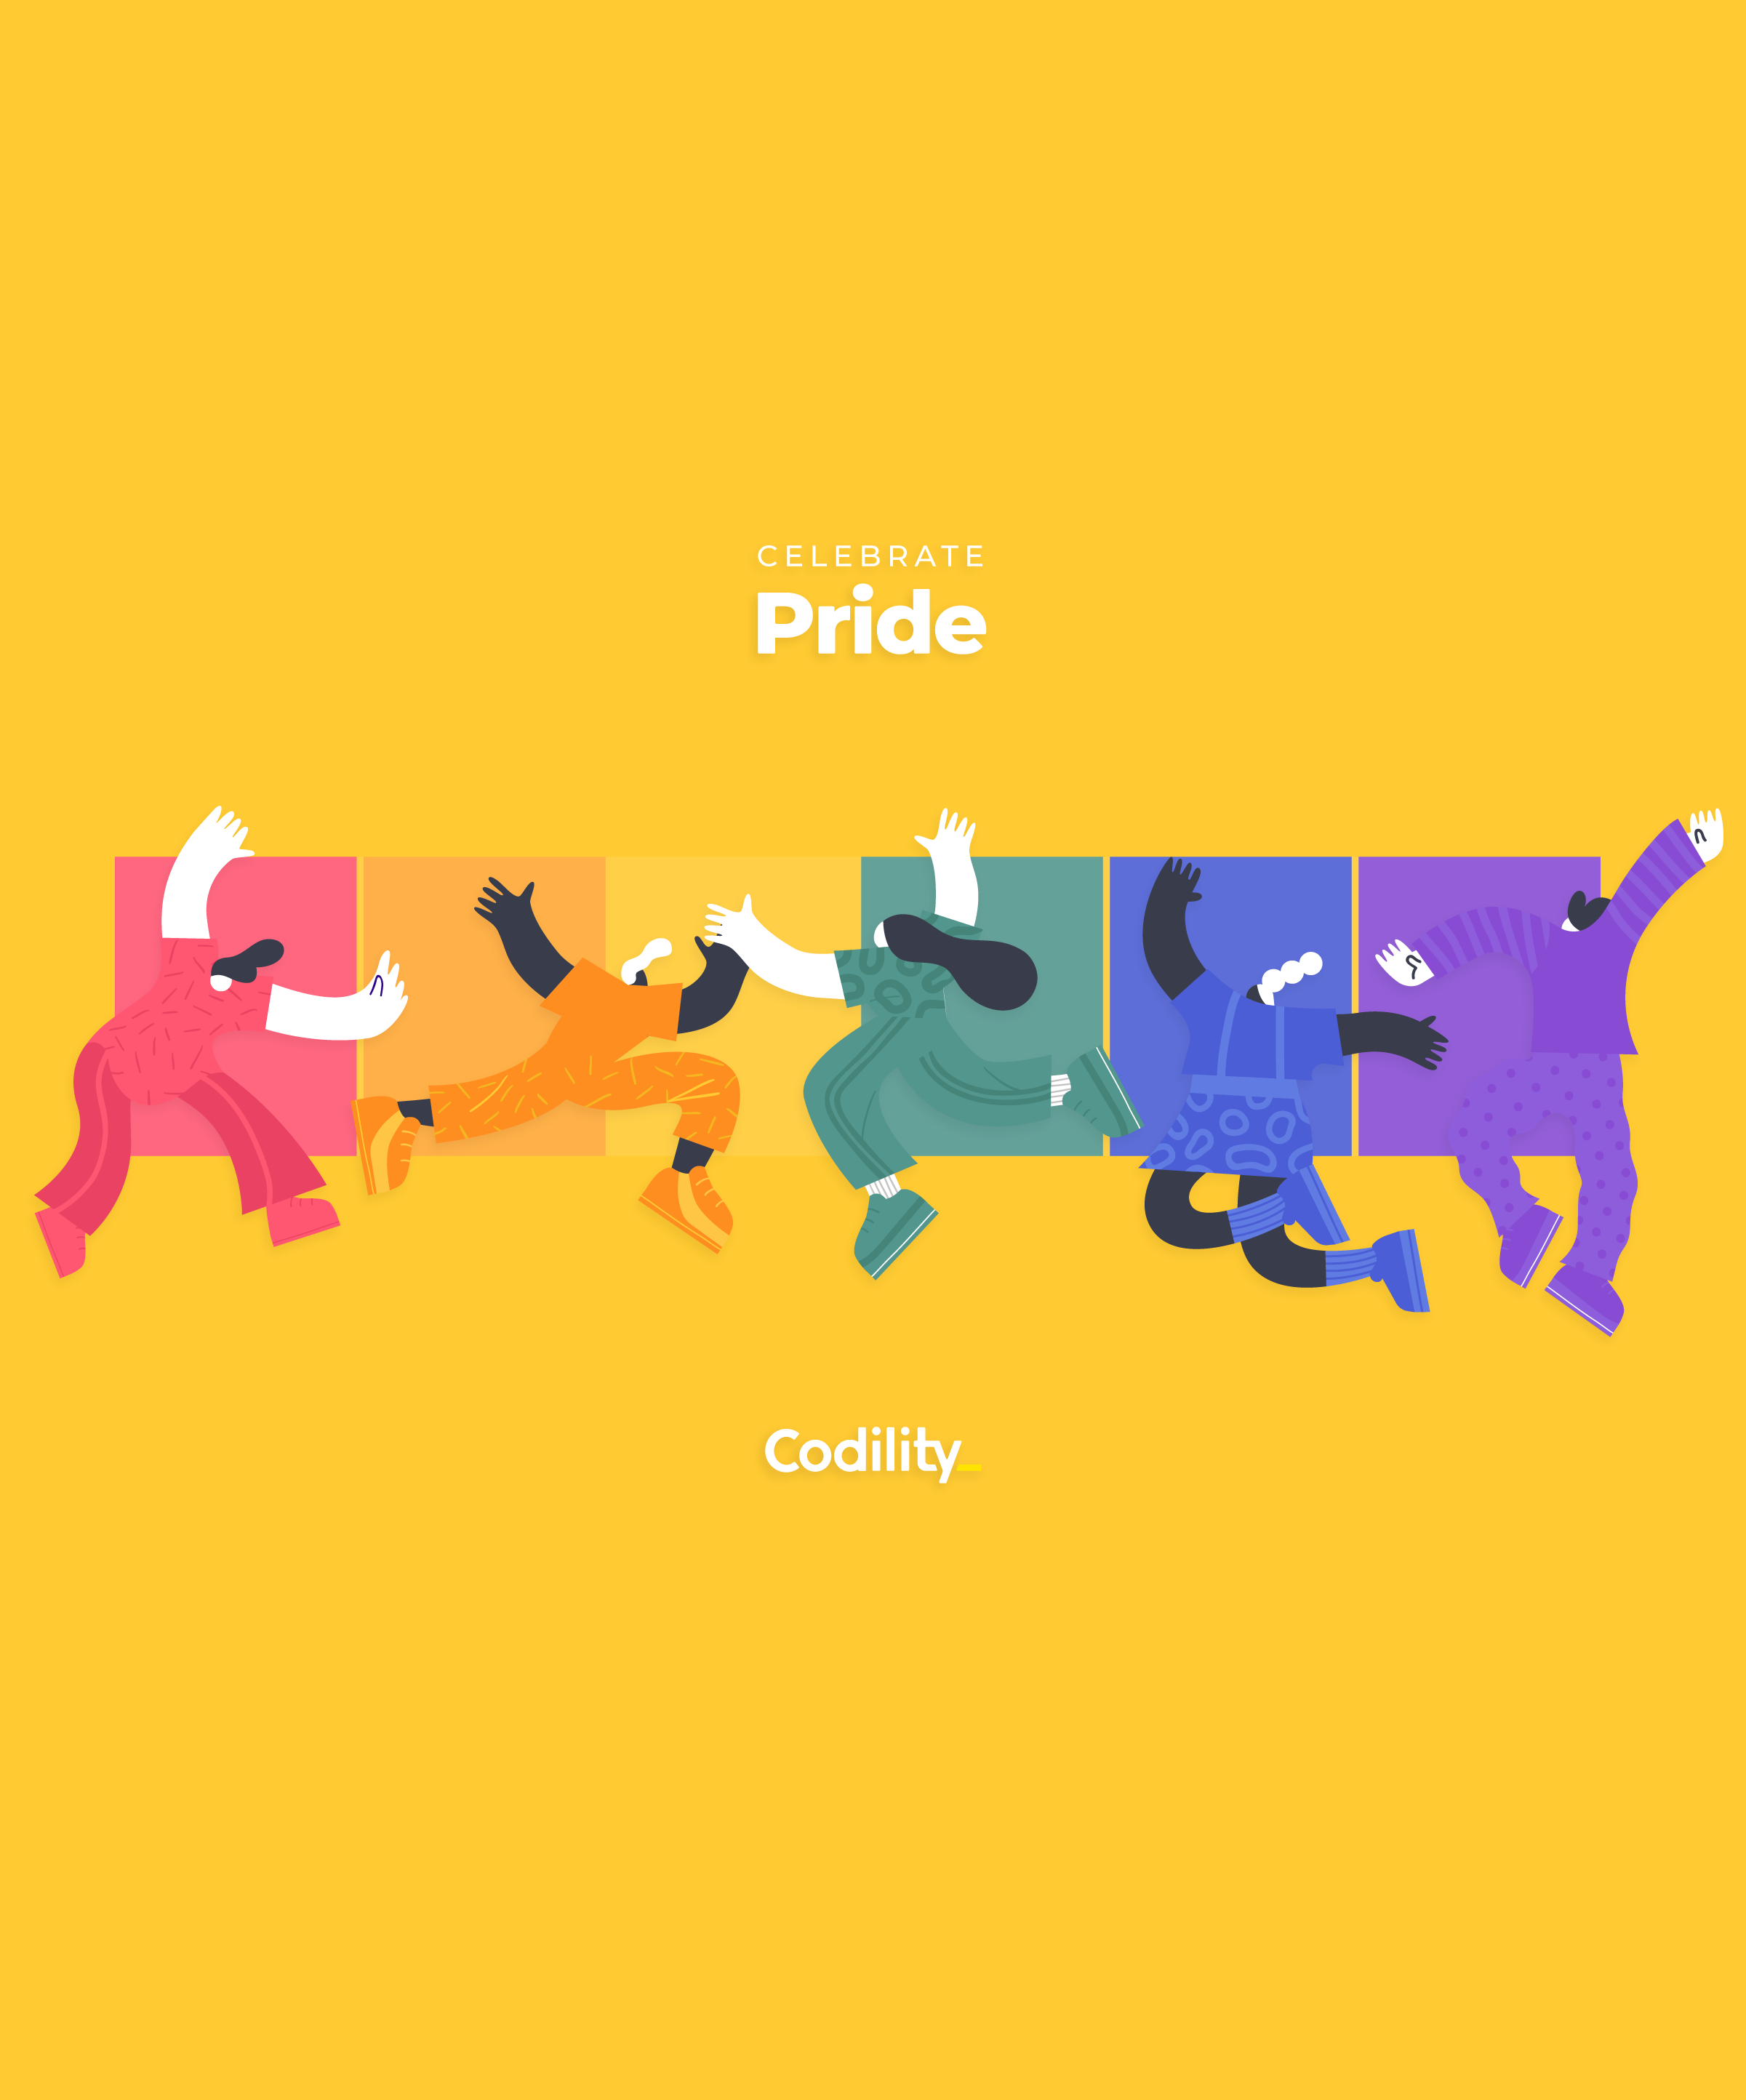 Codility's inclusive workplace for LGBTQIA+ employees